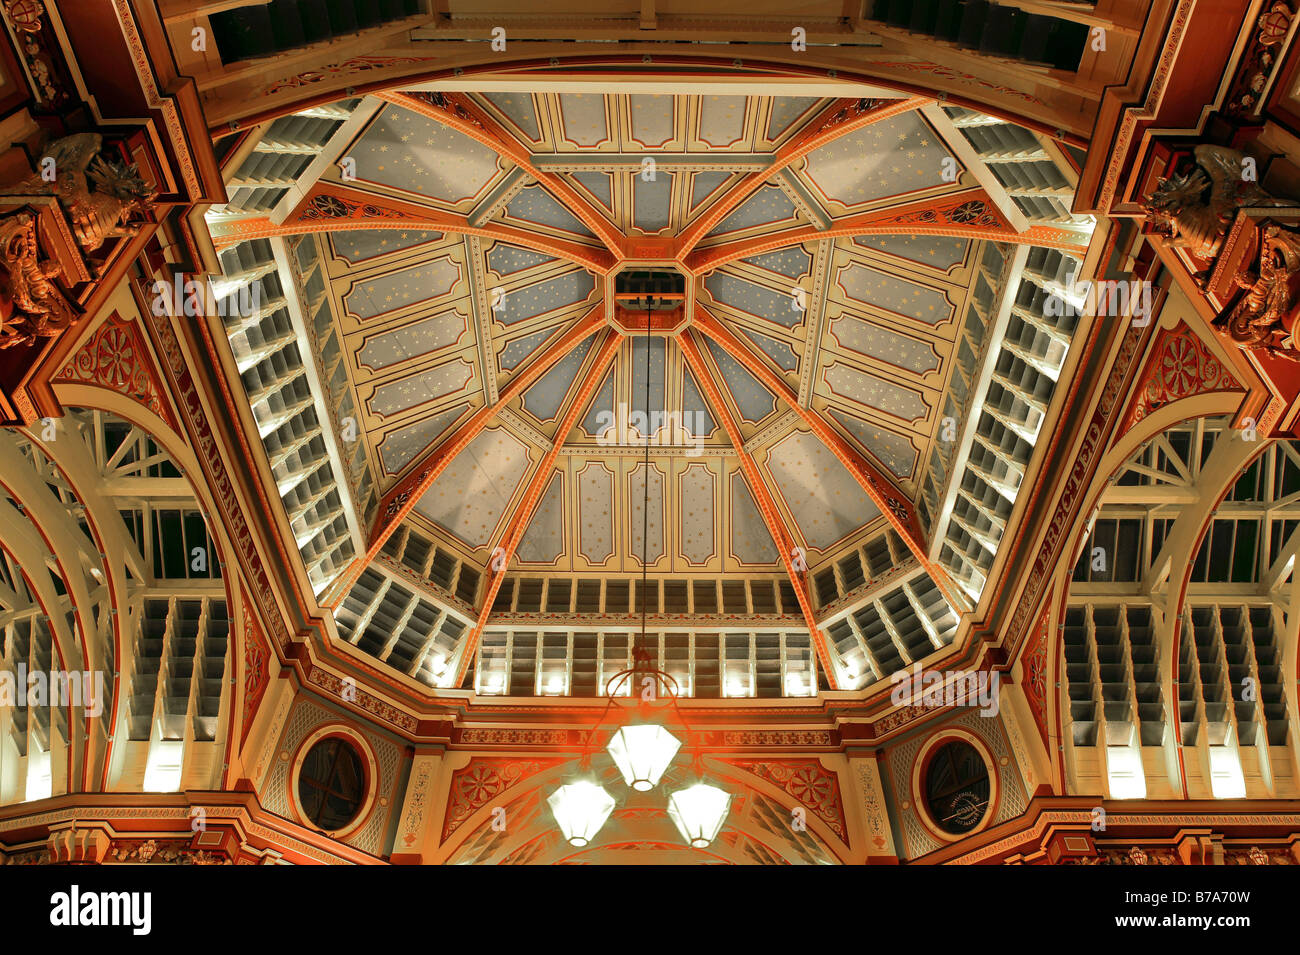 Ceiling of the Leadenhall Market, shopping arcade at night in London, England, Great Britain, Europe Stock Photo